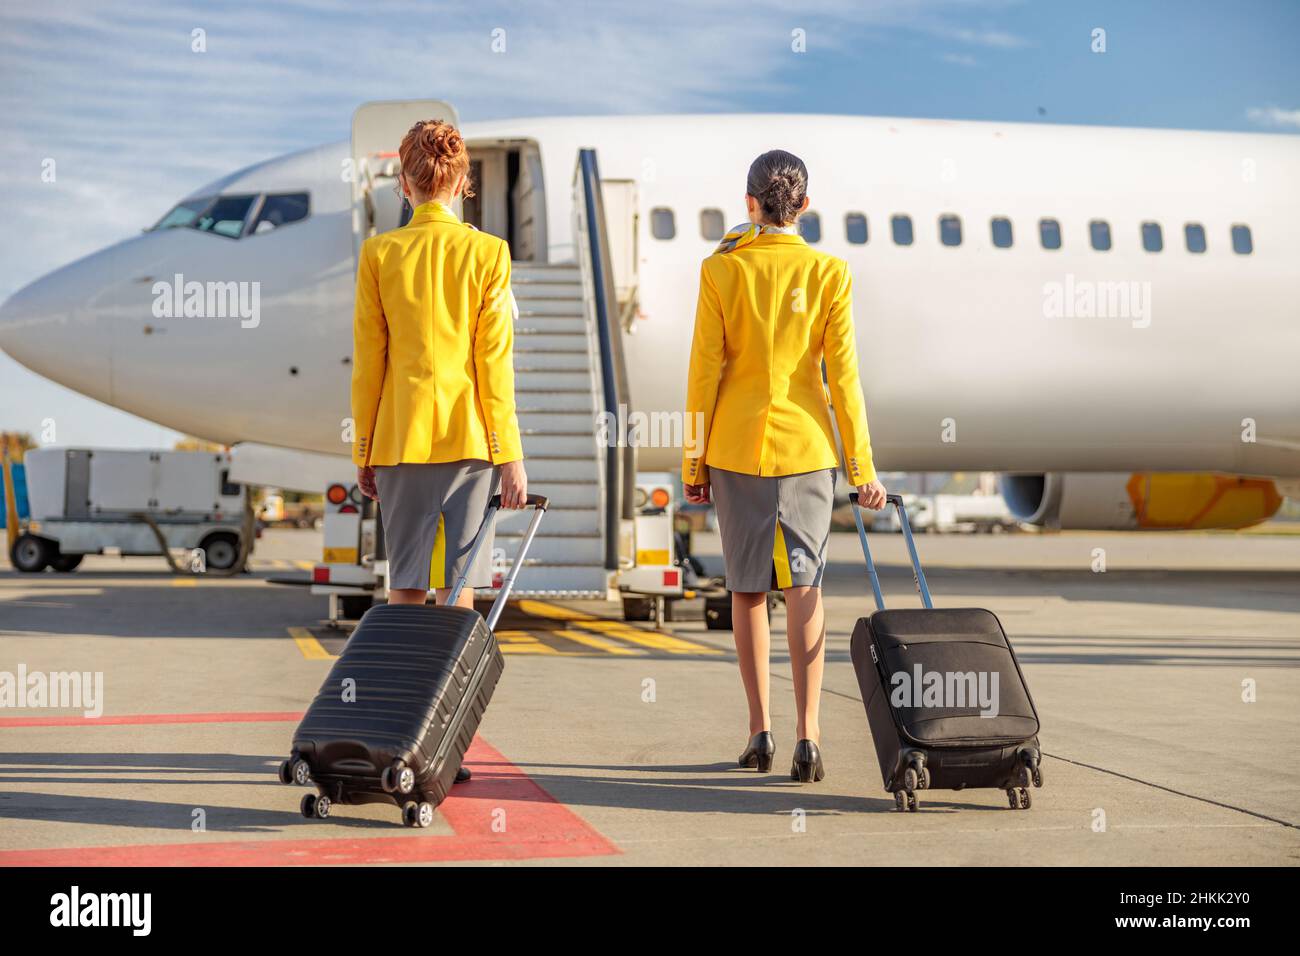 Back view of women flight attendants with trolley luggage bags walking down airfield and heading to passenger airplane Stock Photo